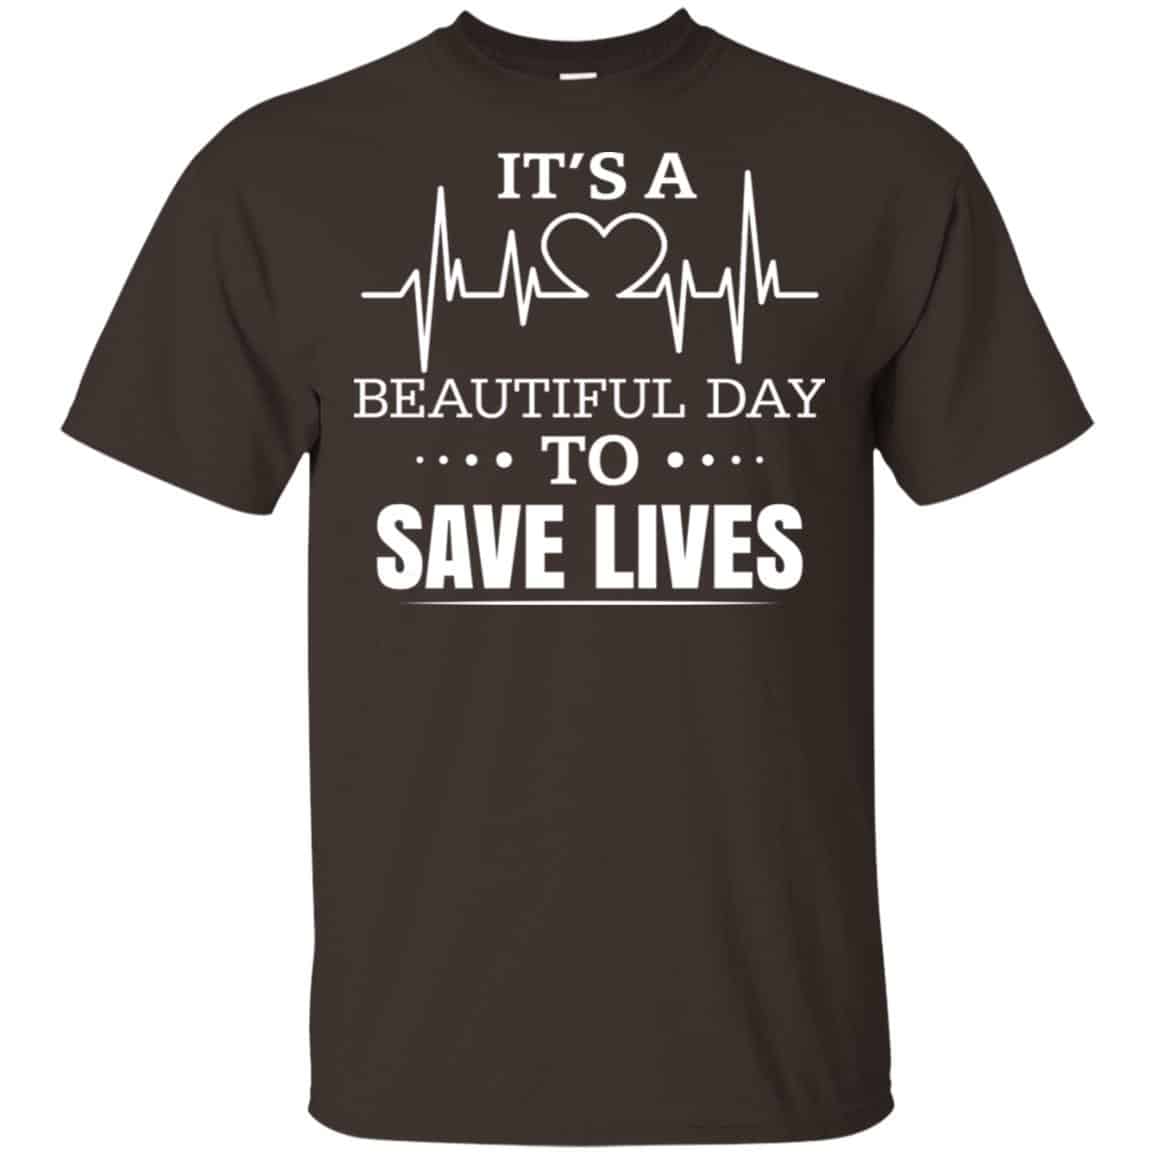 It's A Beautiful Day To Save Lives Shirt, Hoodie, Tank | 0sTees